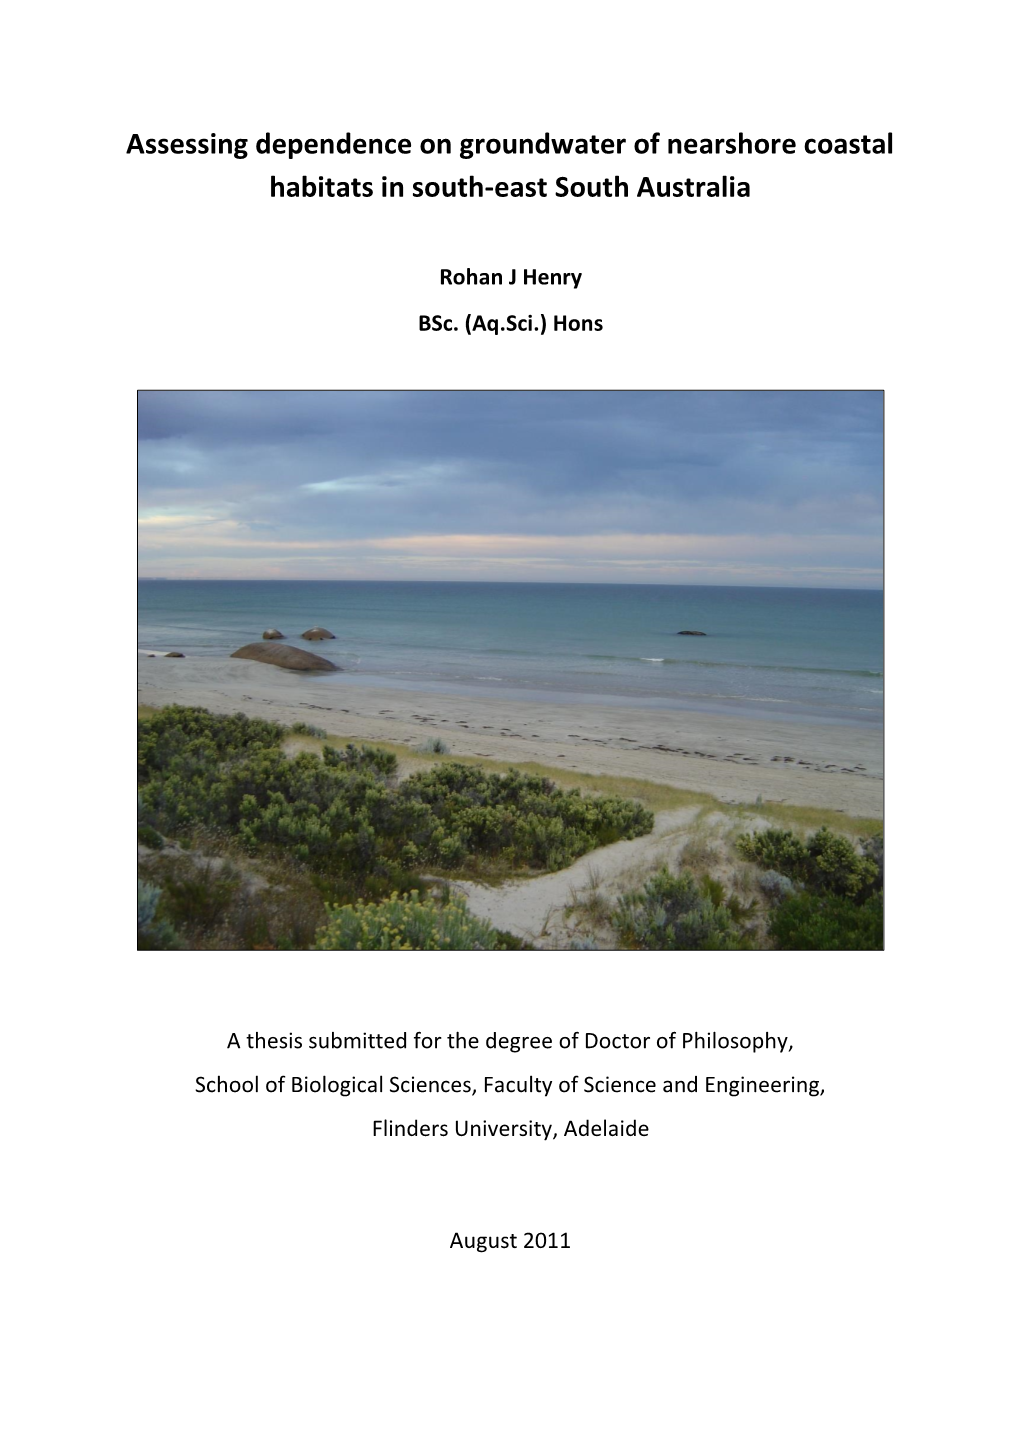 Assessing Dependence on Groundwater of Nearshore Coastal Habitats in South-East South Australia